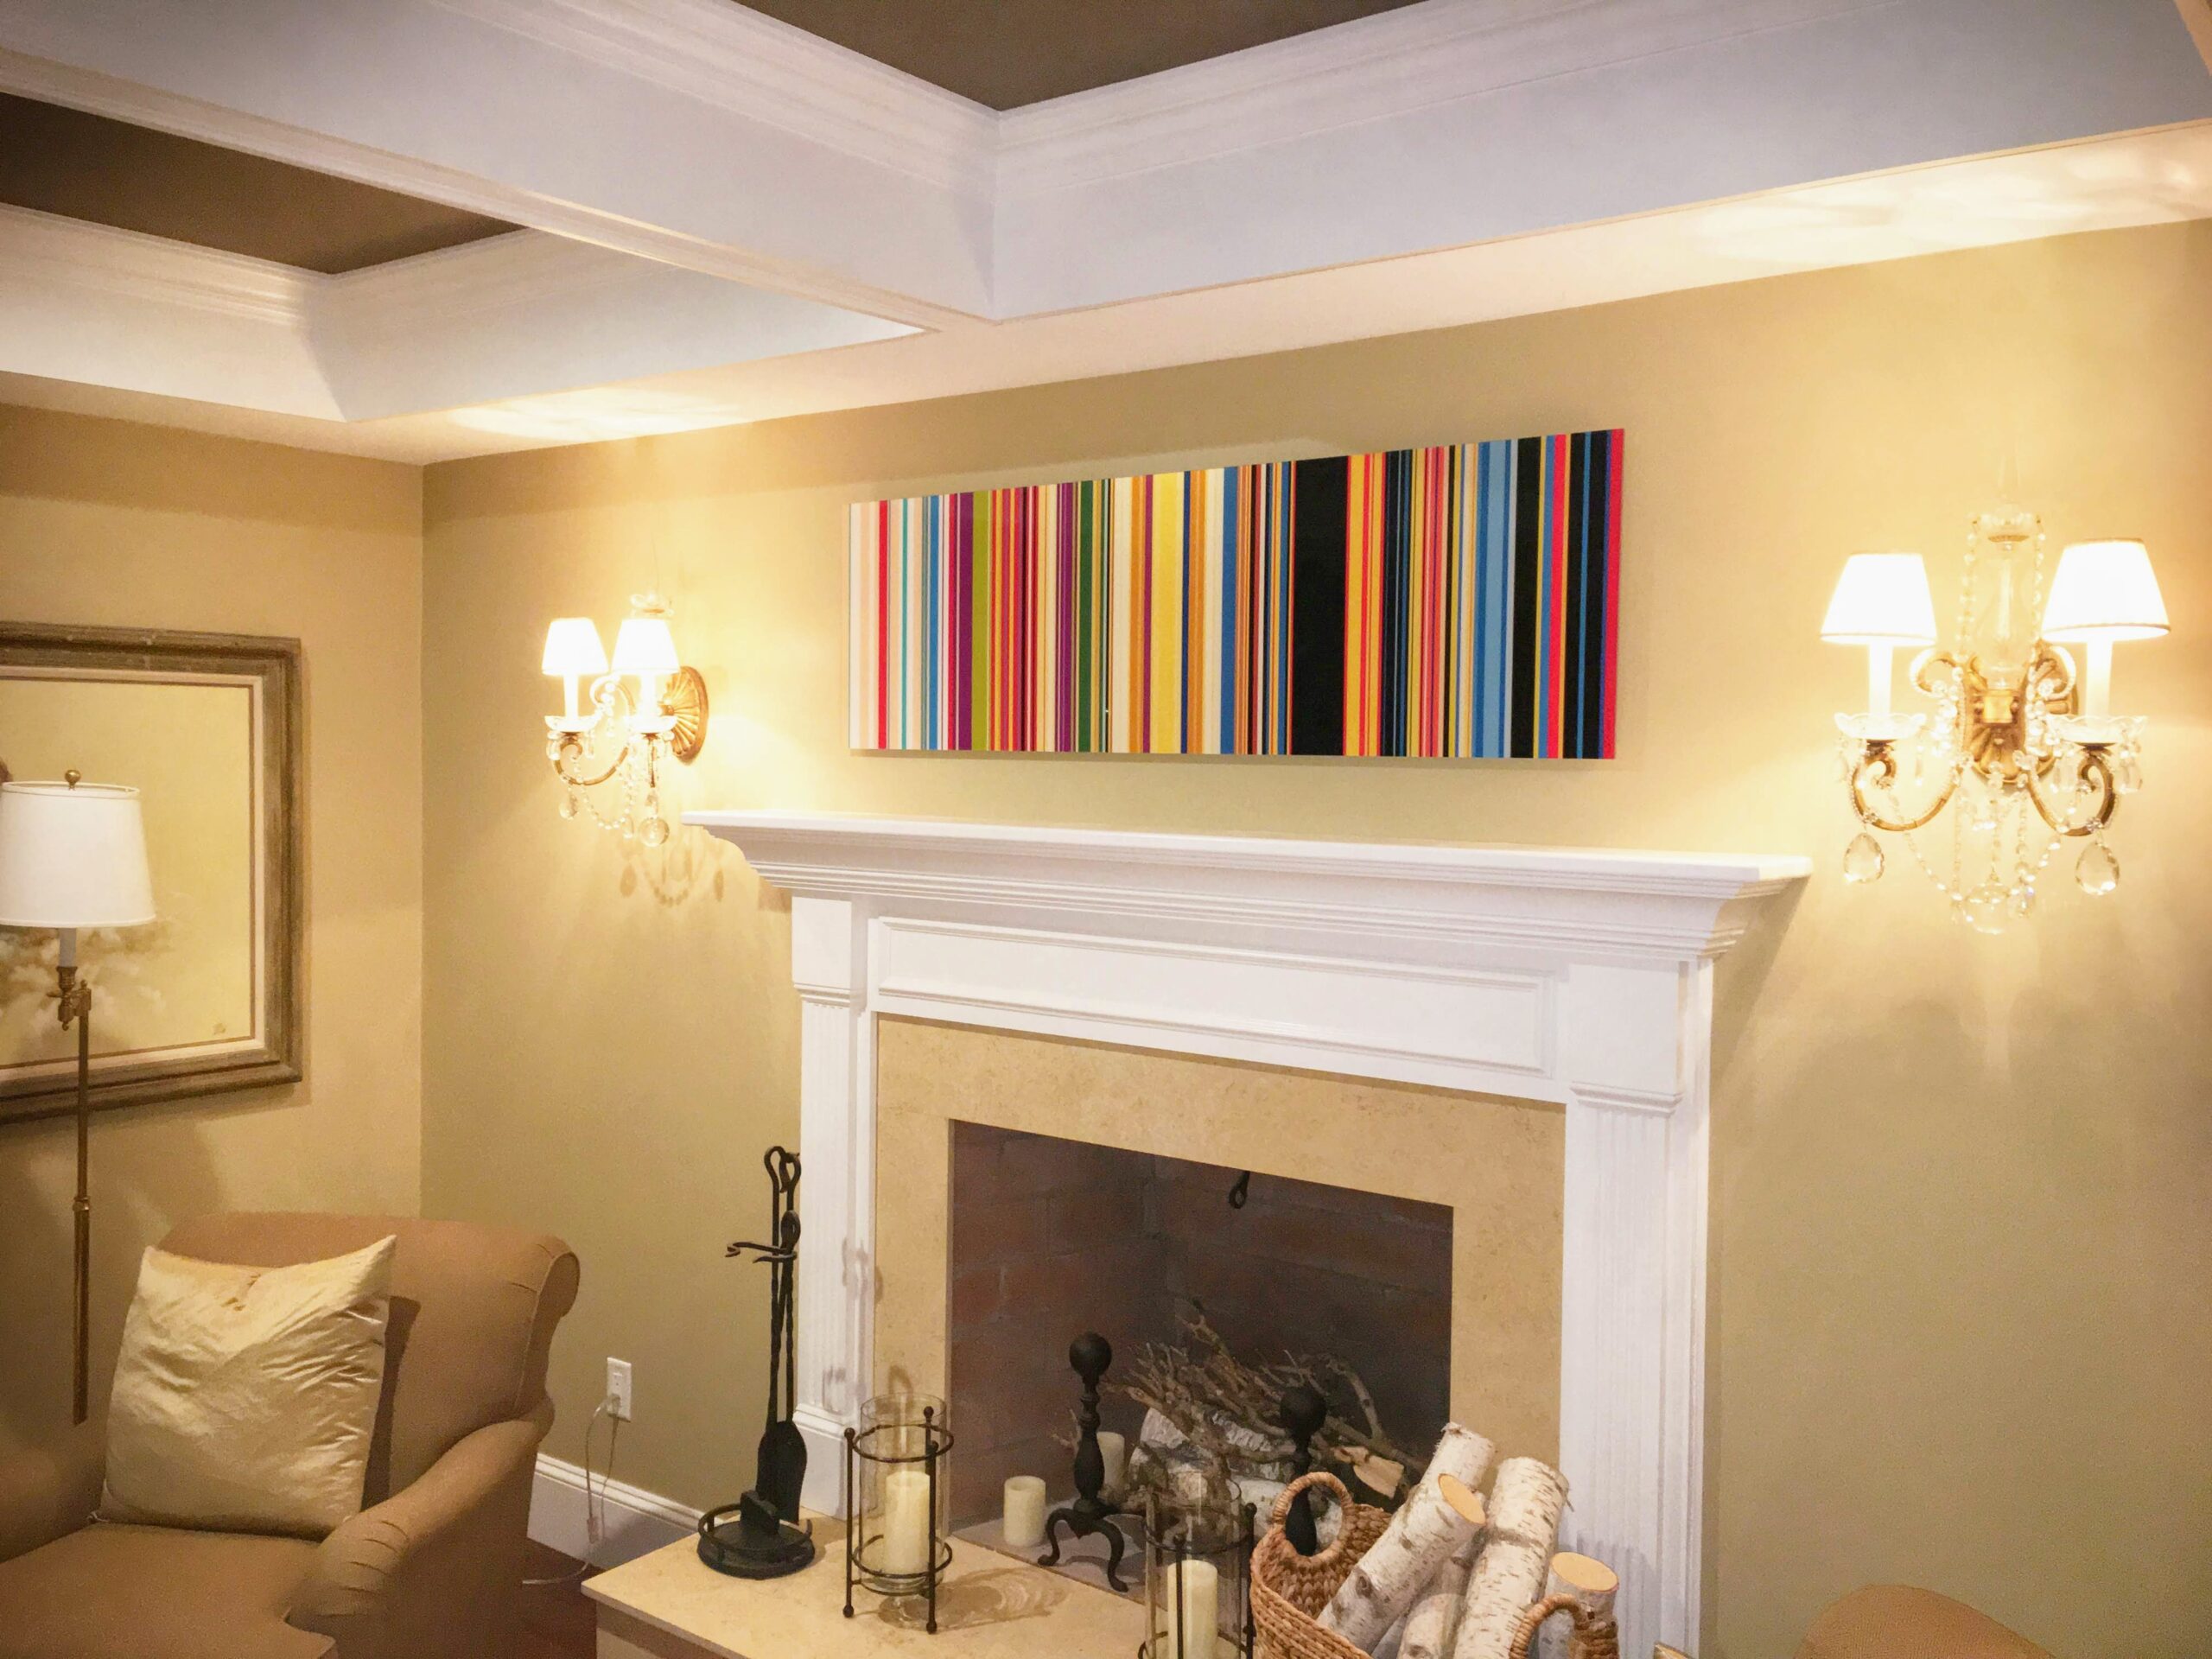 panoramic print above the fireplace